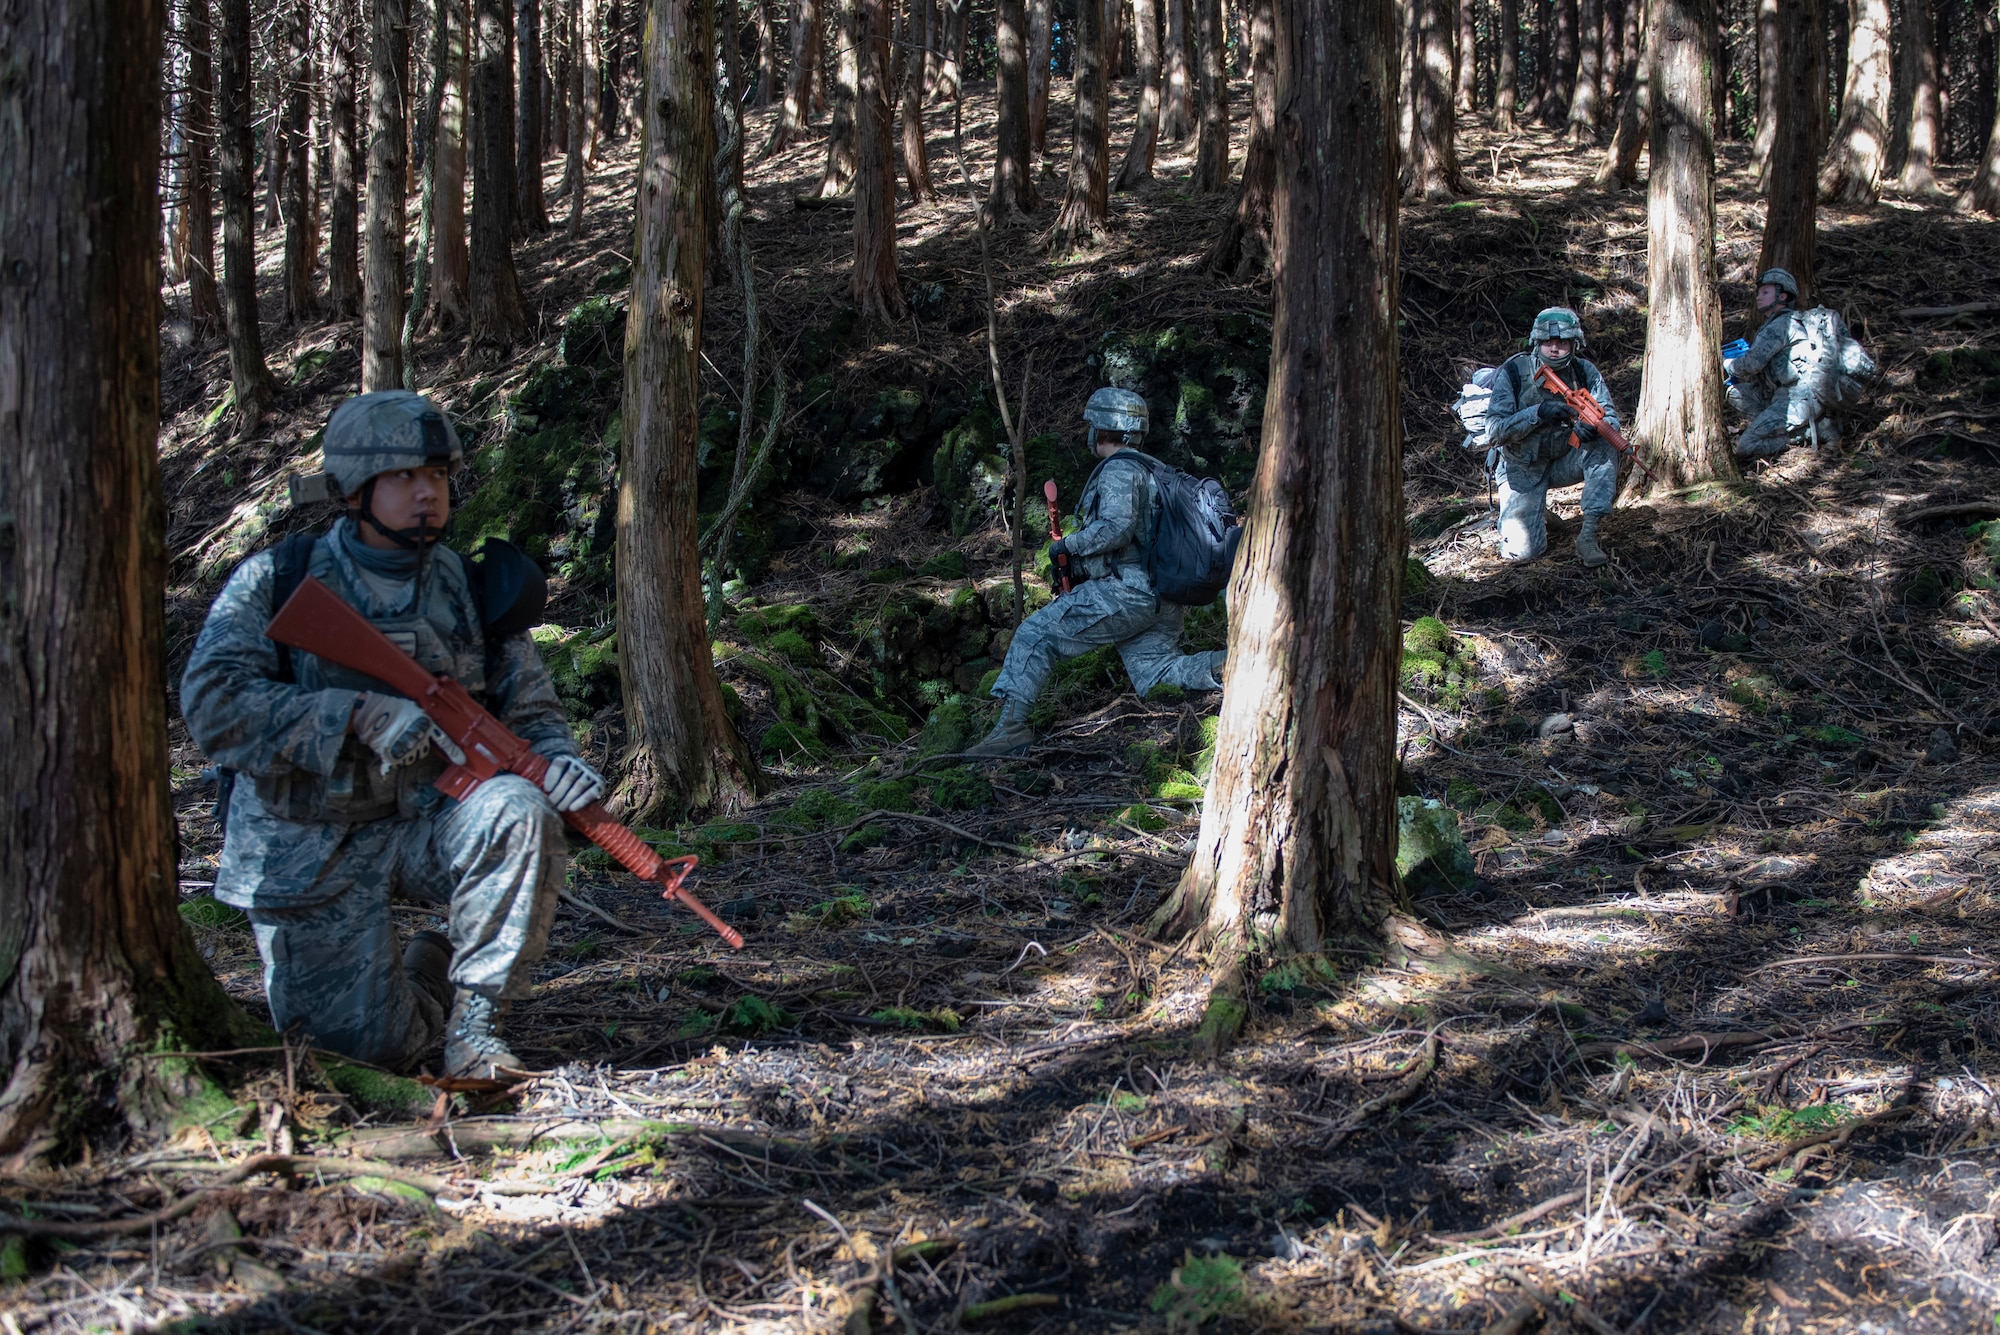 Airmen from the 374th Security Forces Squadron take cover behind trees while the team lead determines their course during a field training exercise at Camp Fuji, Japan, Nov. 8, 2018.